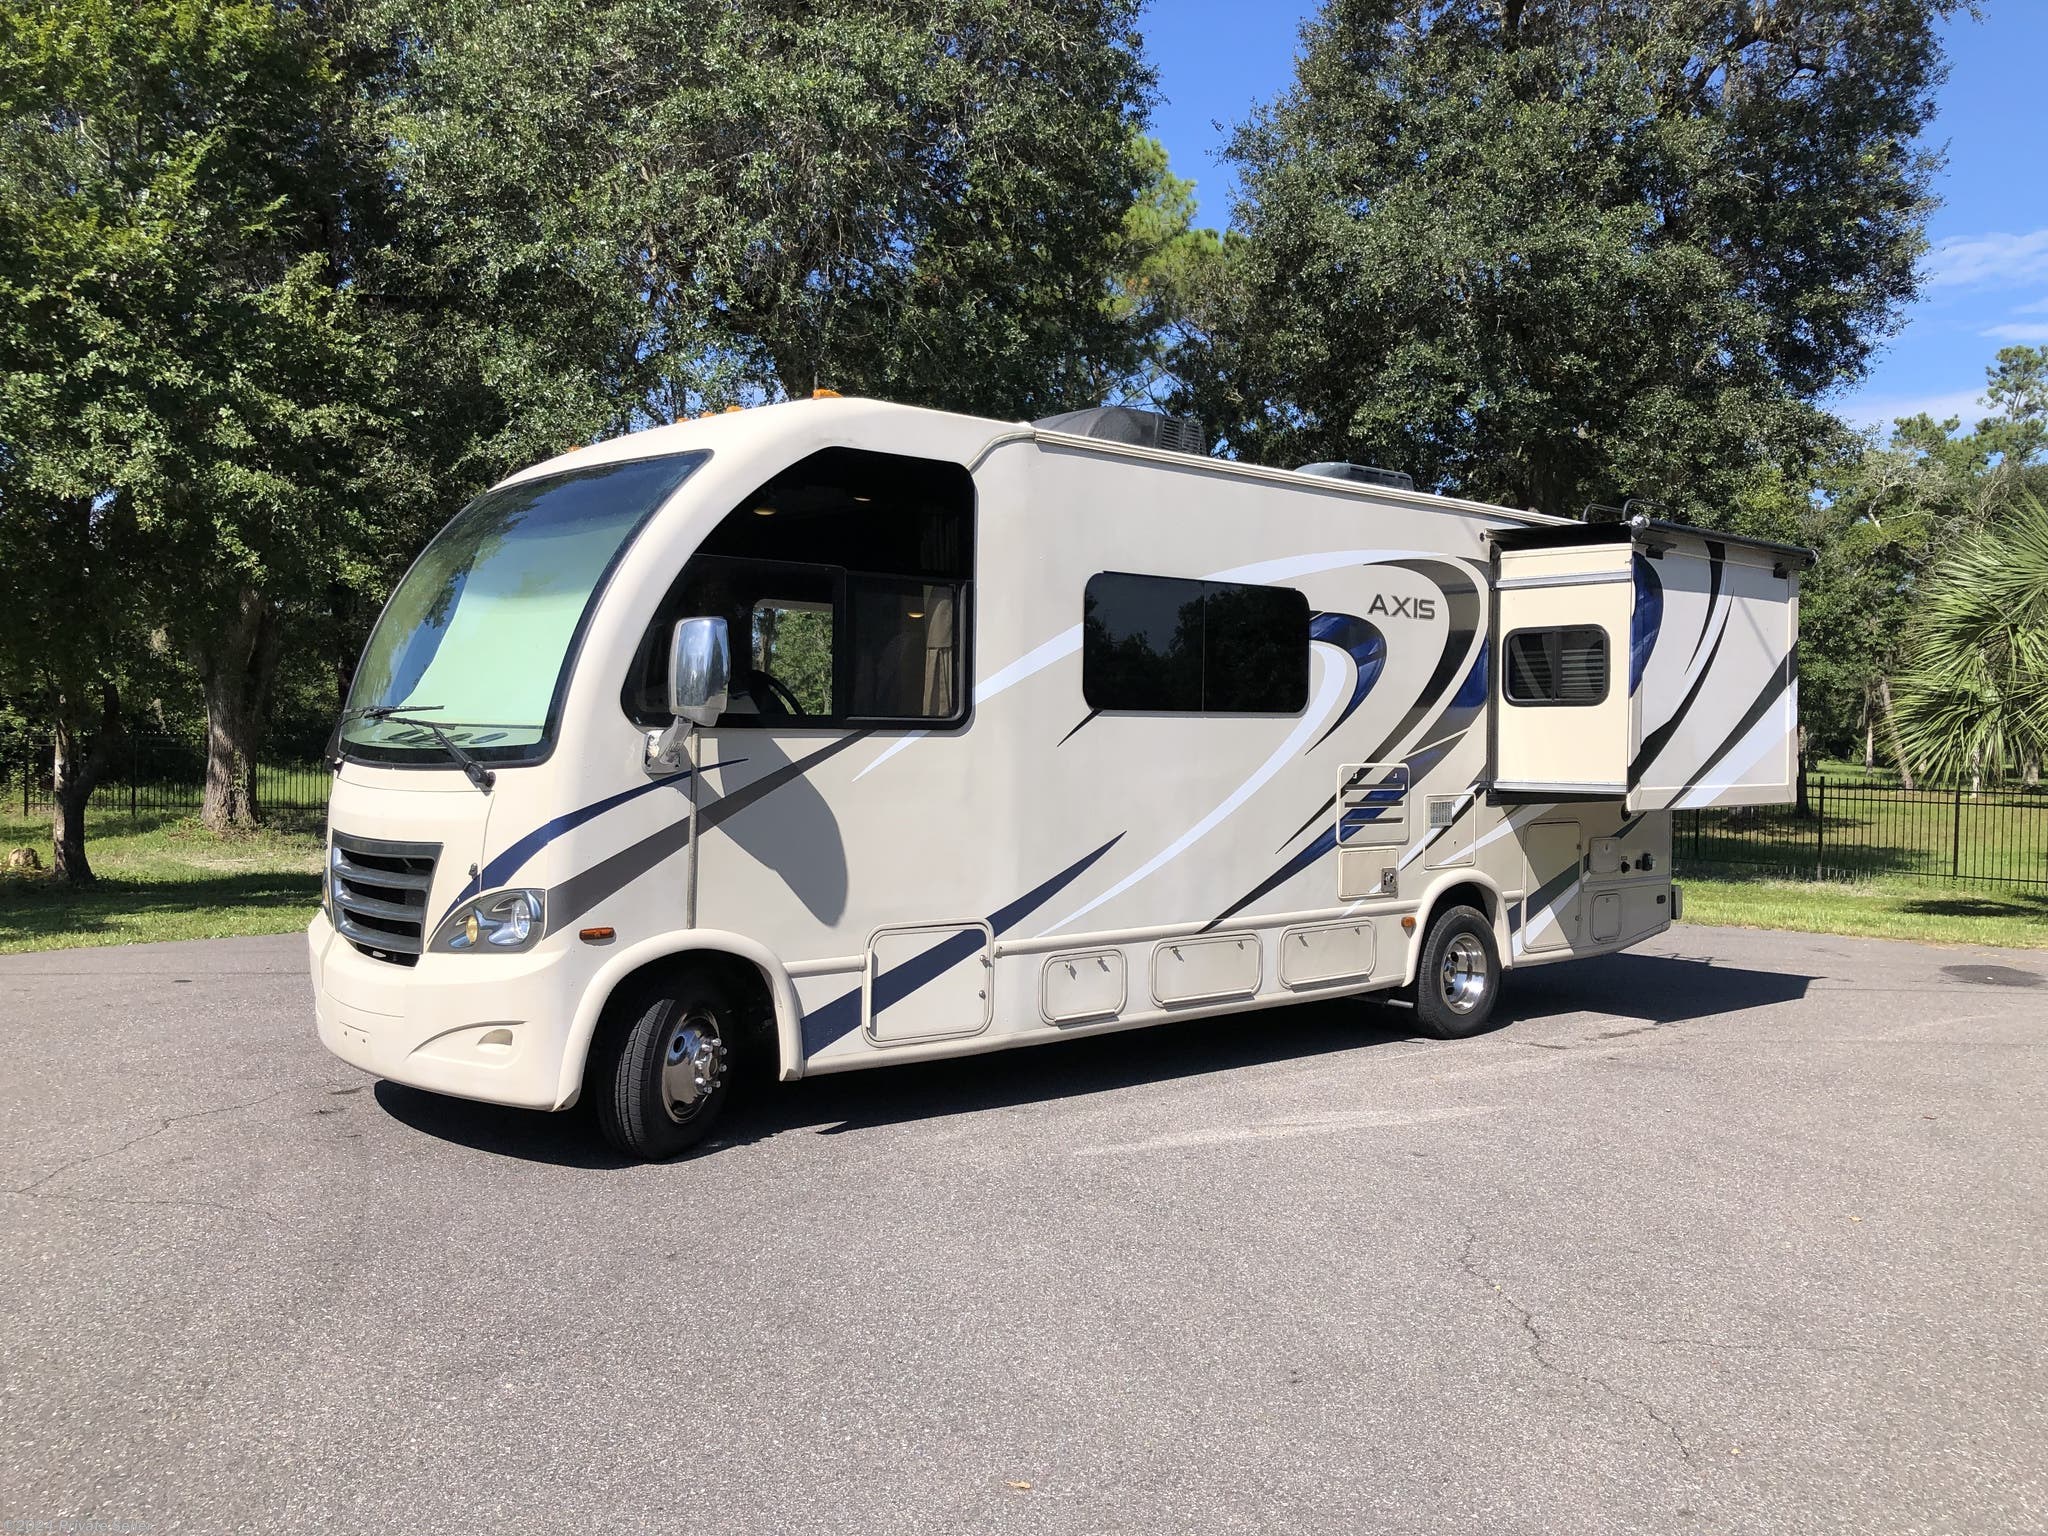 2016 Thor Motor Coach Axis  RV for Sale in Yulee, FL 32097 | |   Classifieds